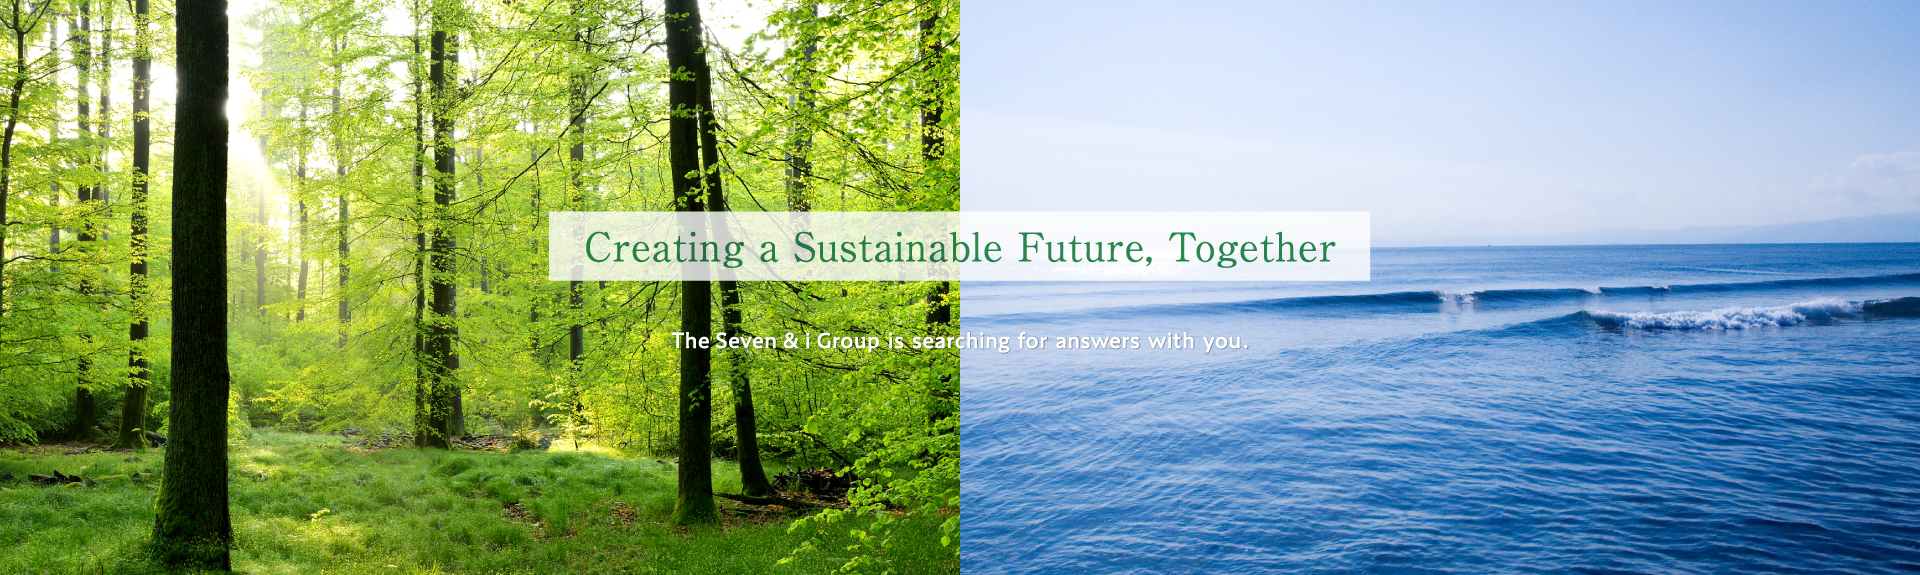 Creating a Sustainable Future, Together